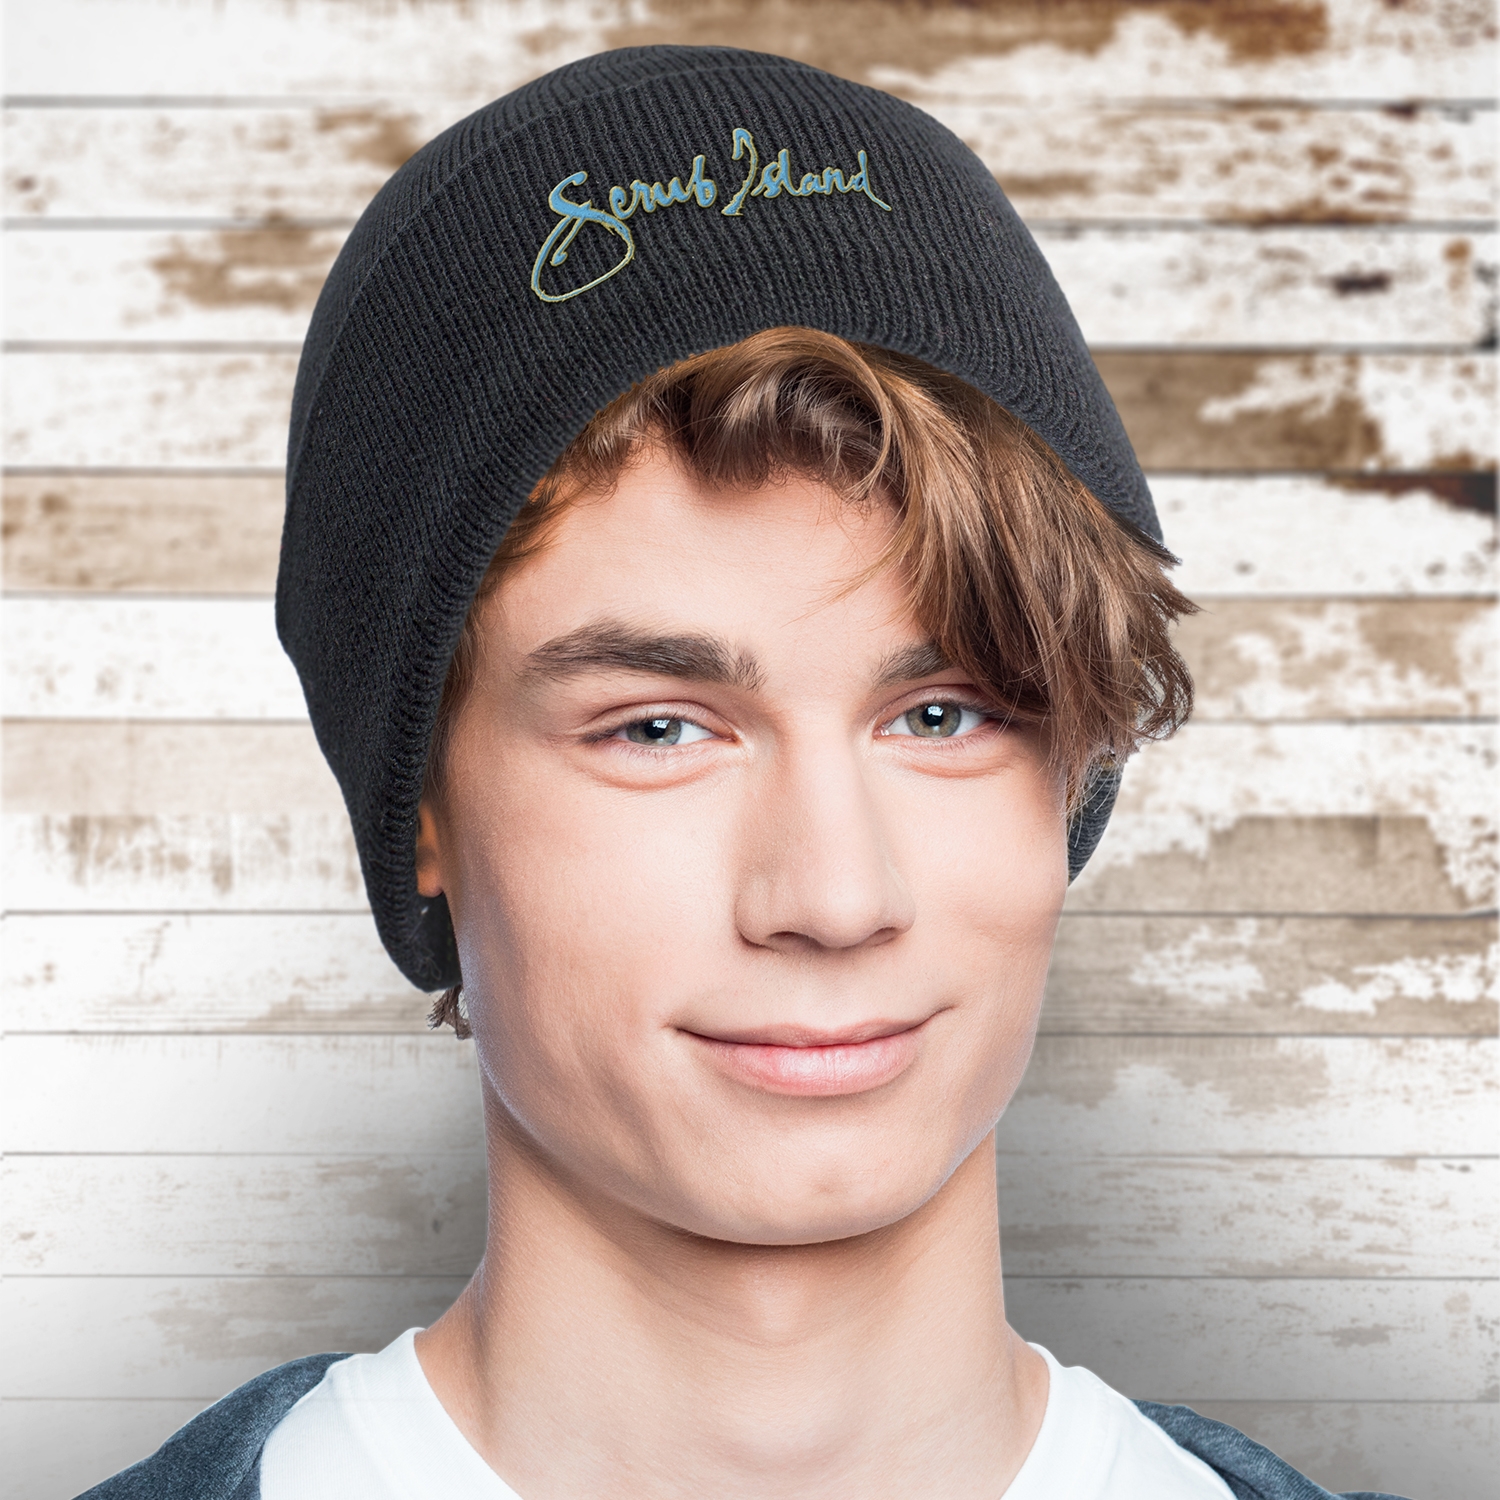 Cardrona Wool Blend Beanie Features